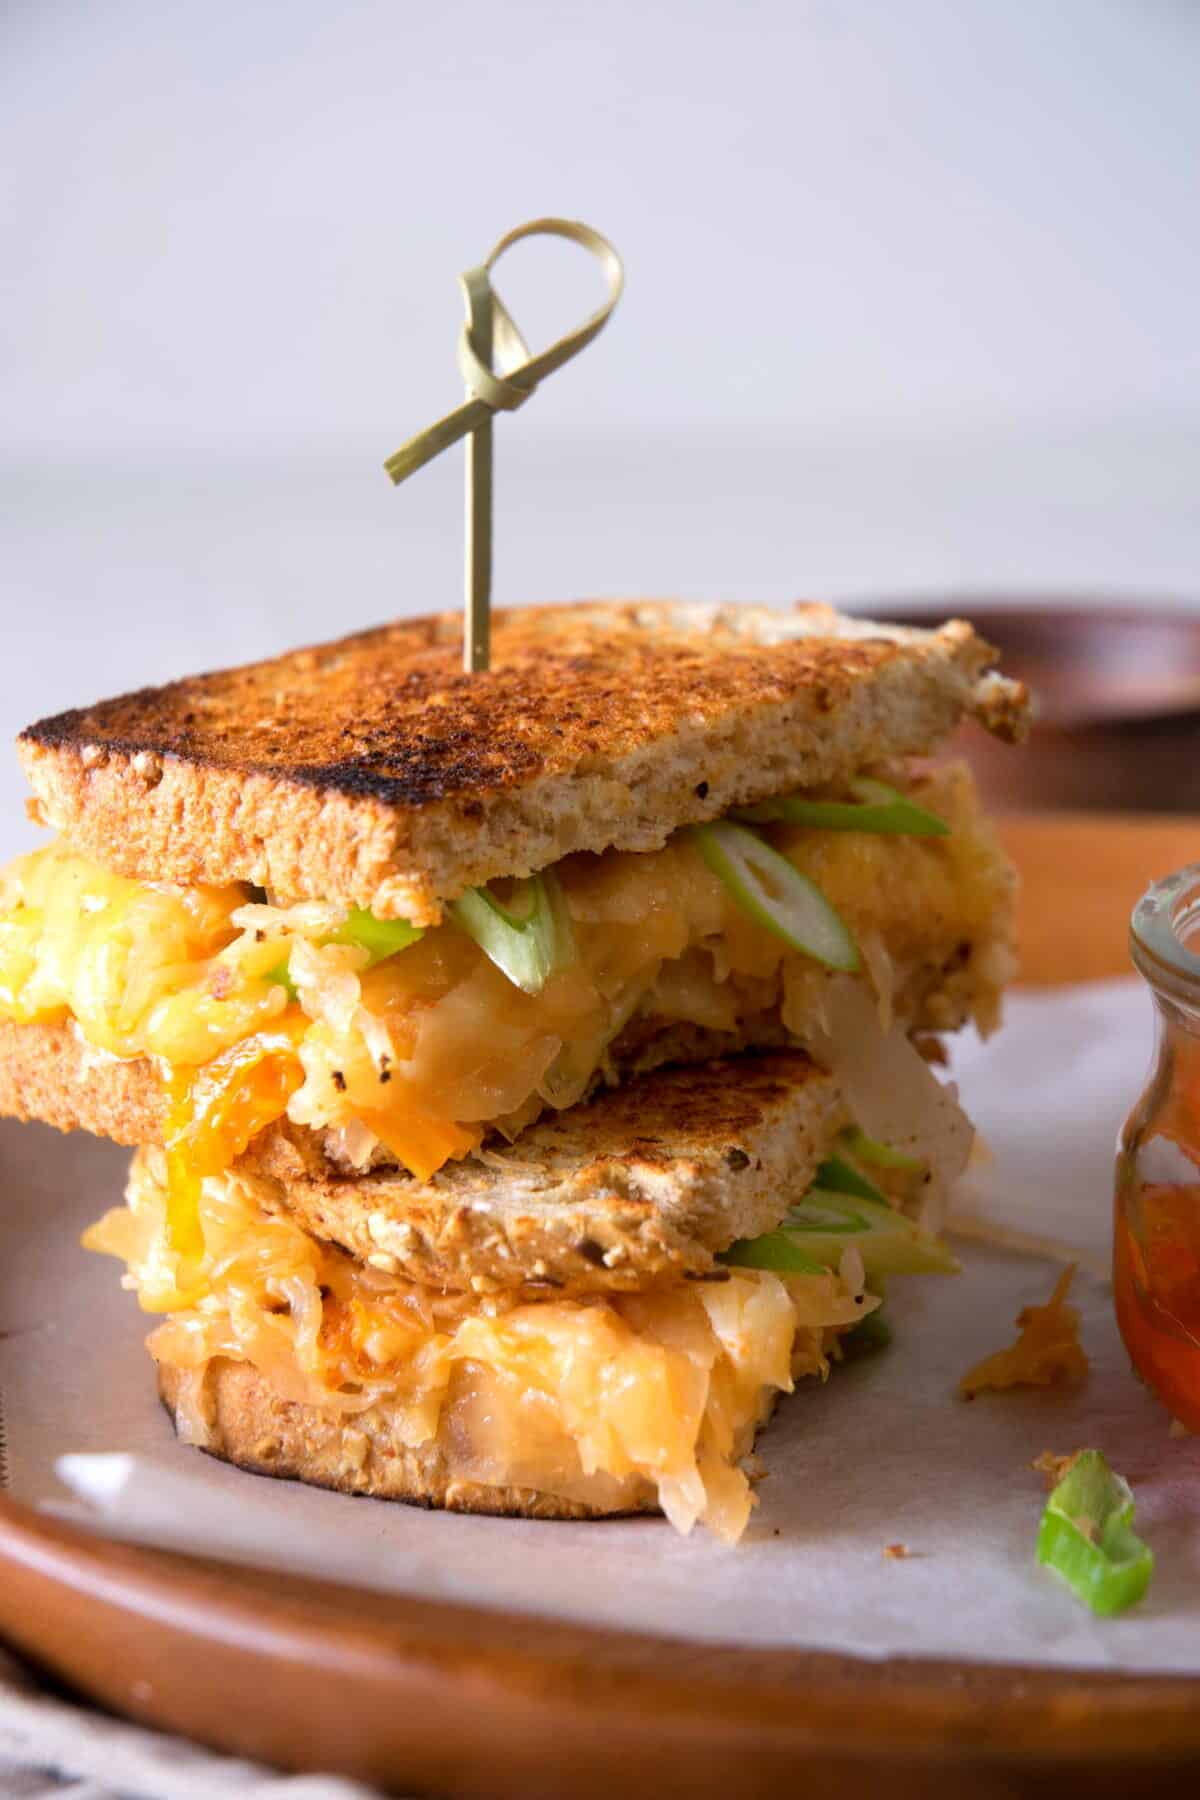 Kimchi grilled cheese sandwiches on a brown plate.